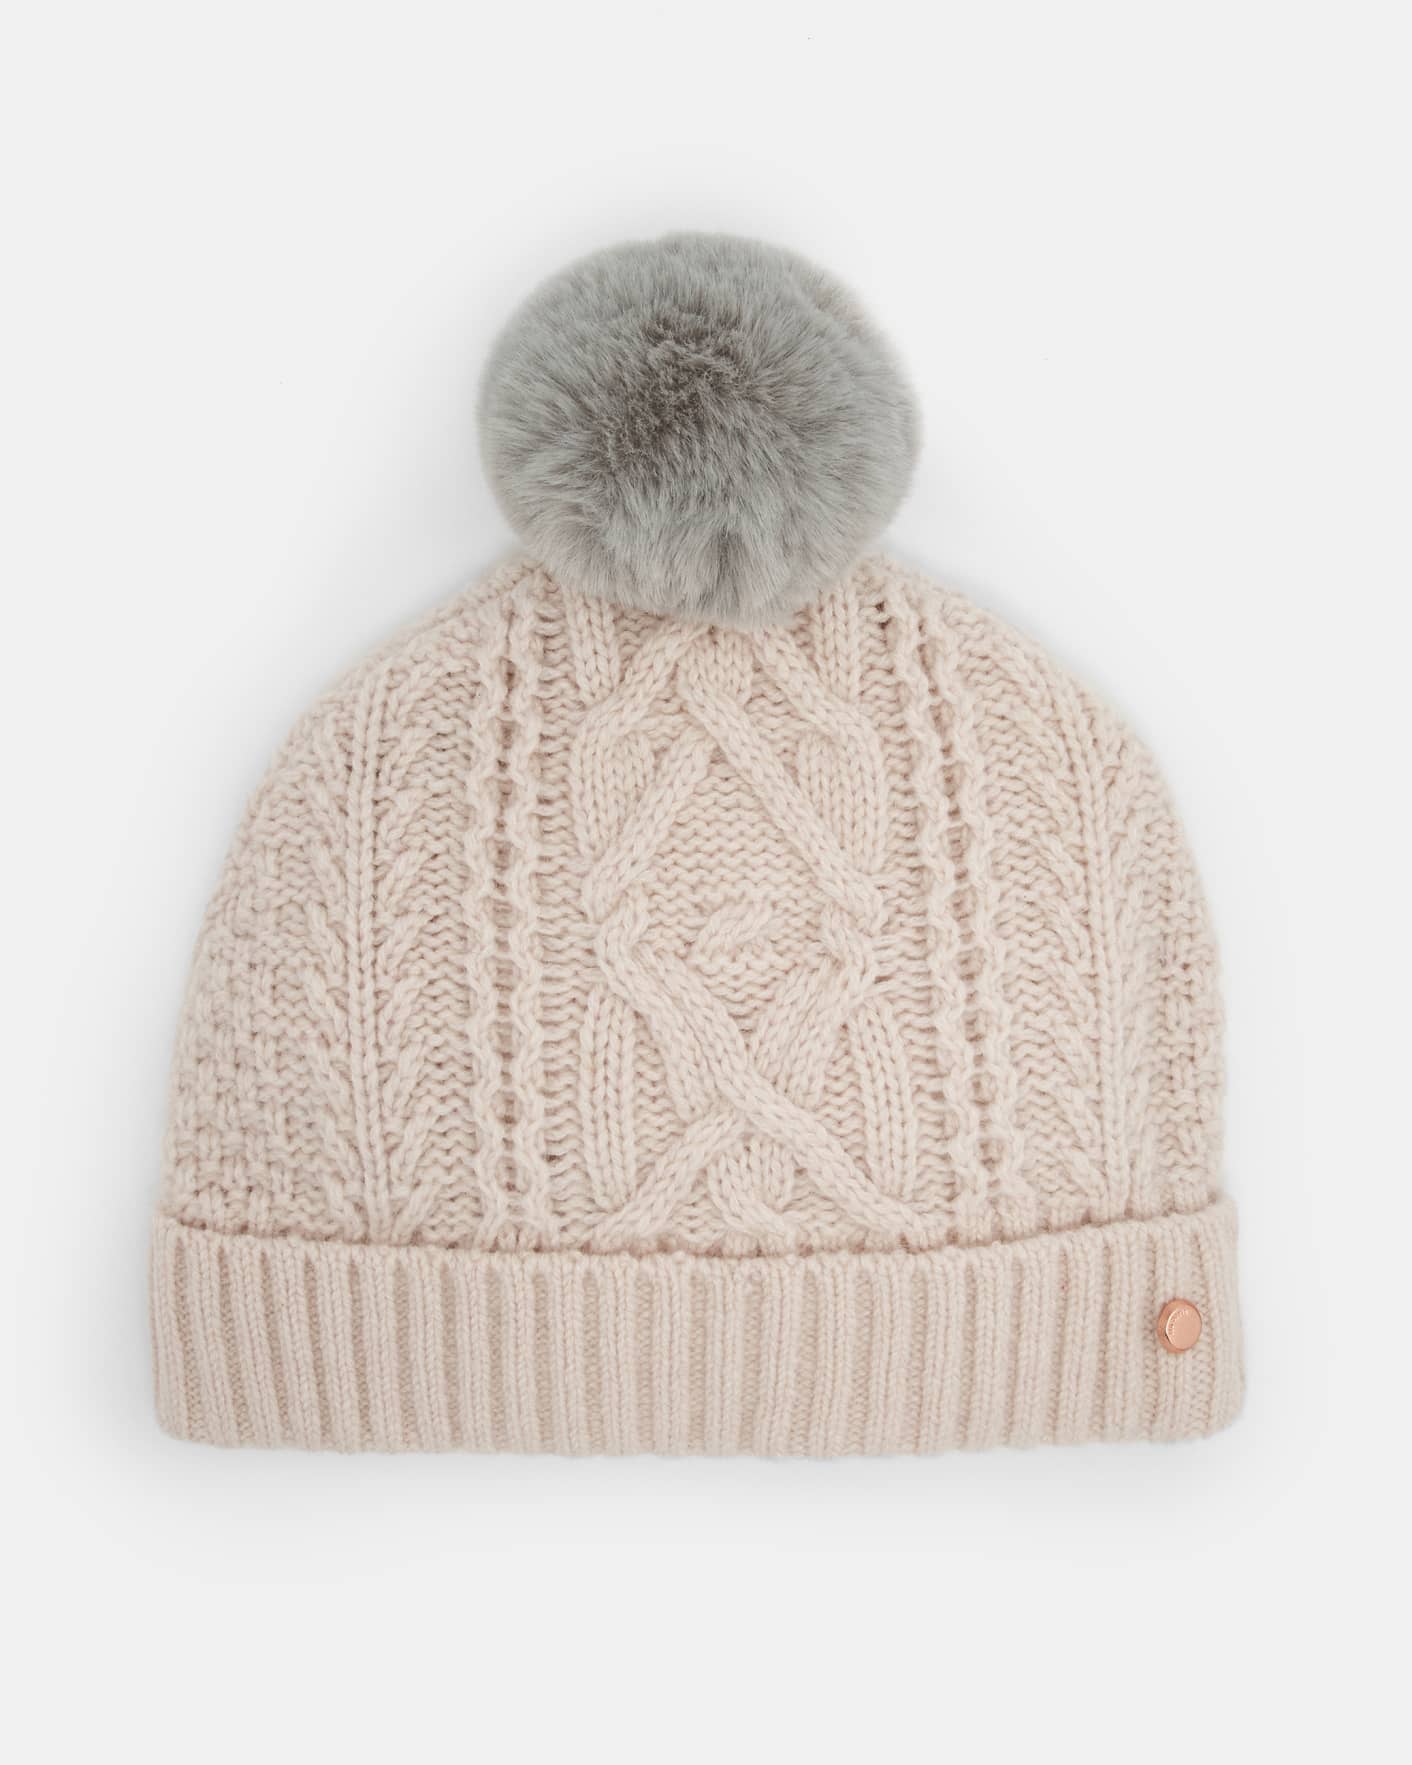 NUDE-PINK Knitted wool pom pom hat and socks set Ted Baker